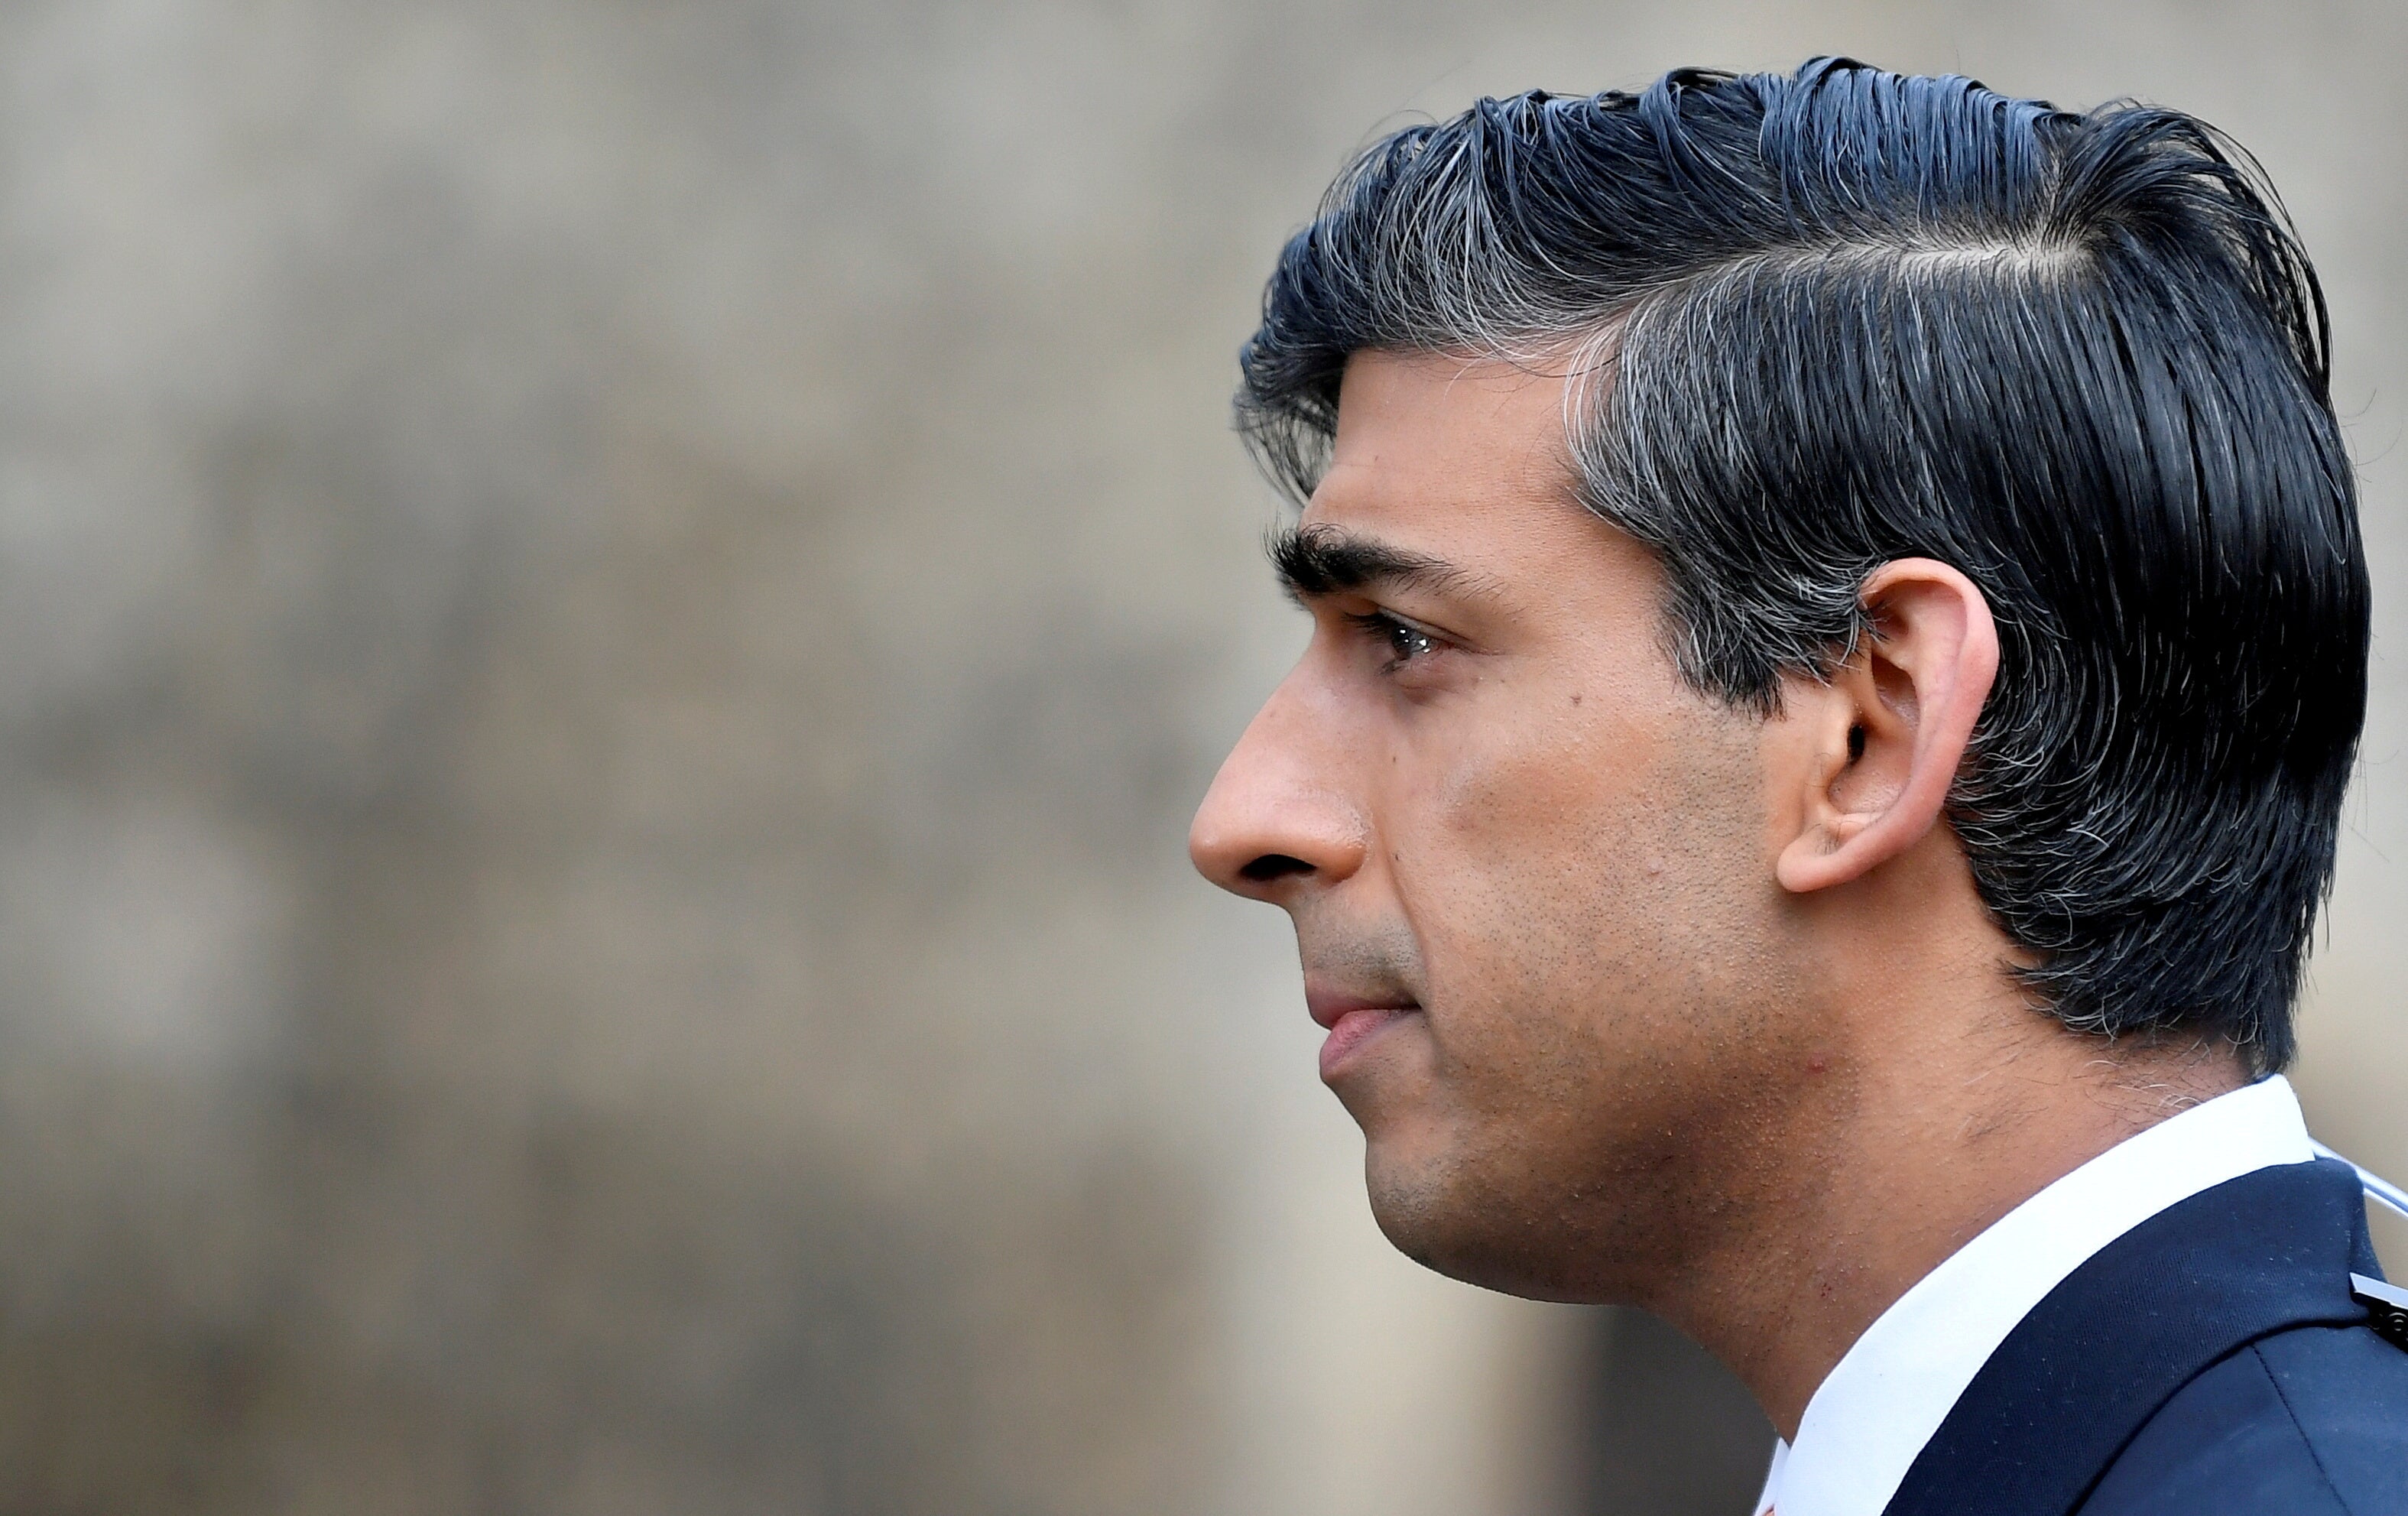 Rishi Sunak wants to start repairing the nation’s battered finances at 3 March Budget